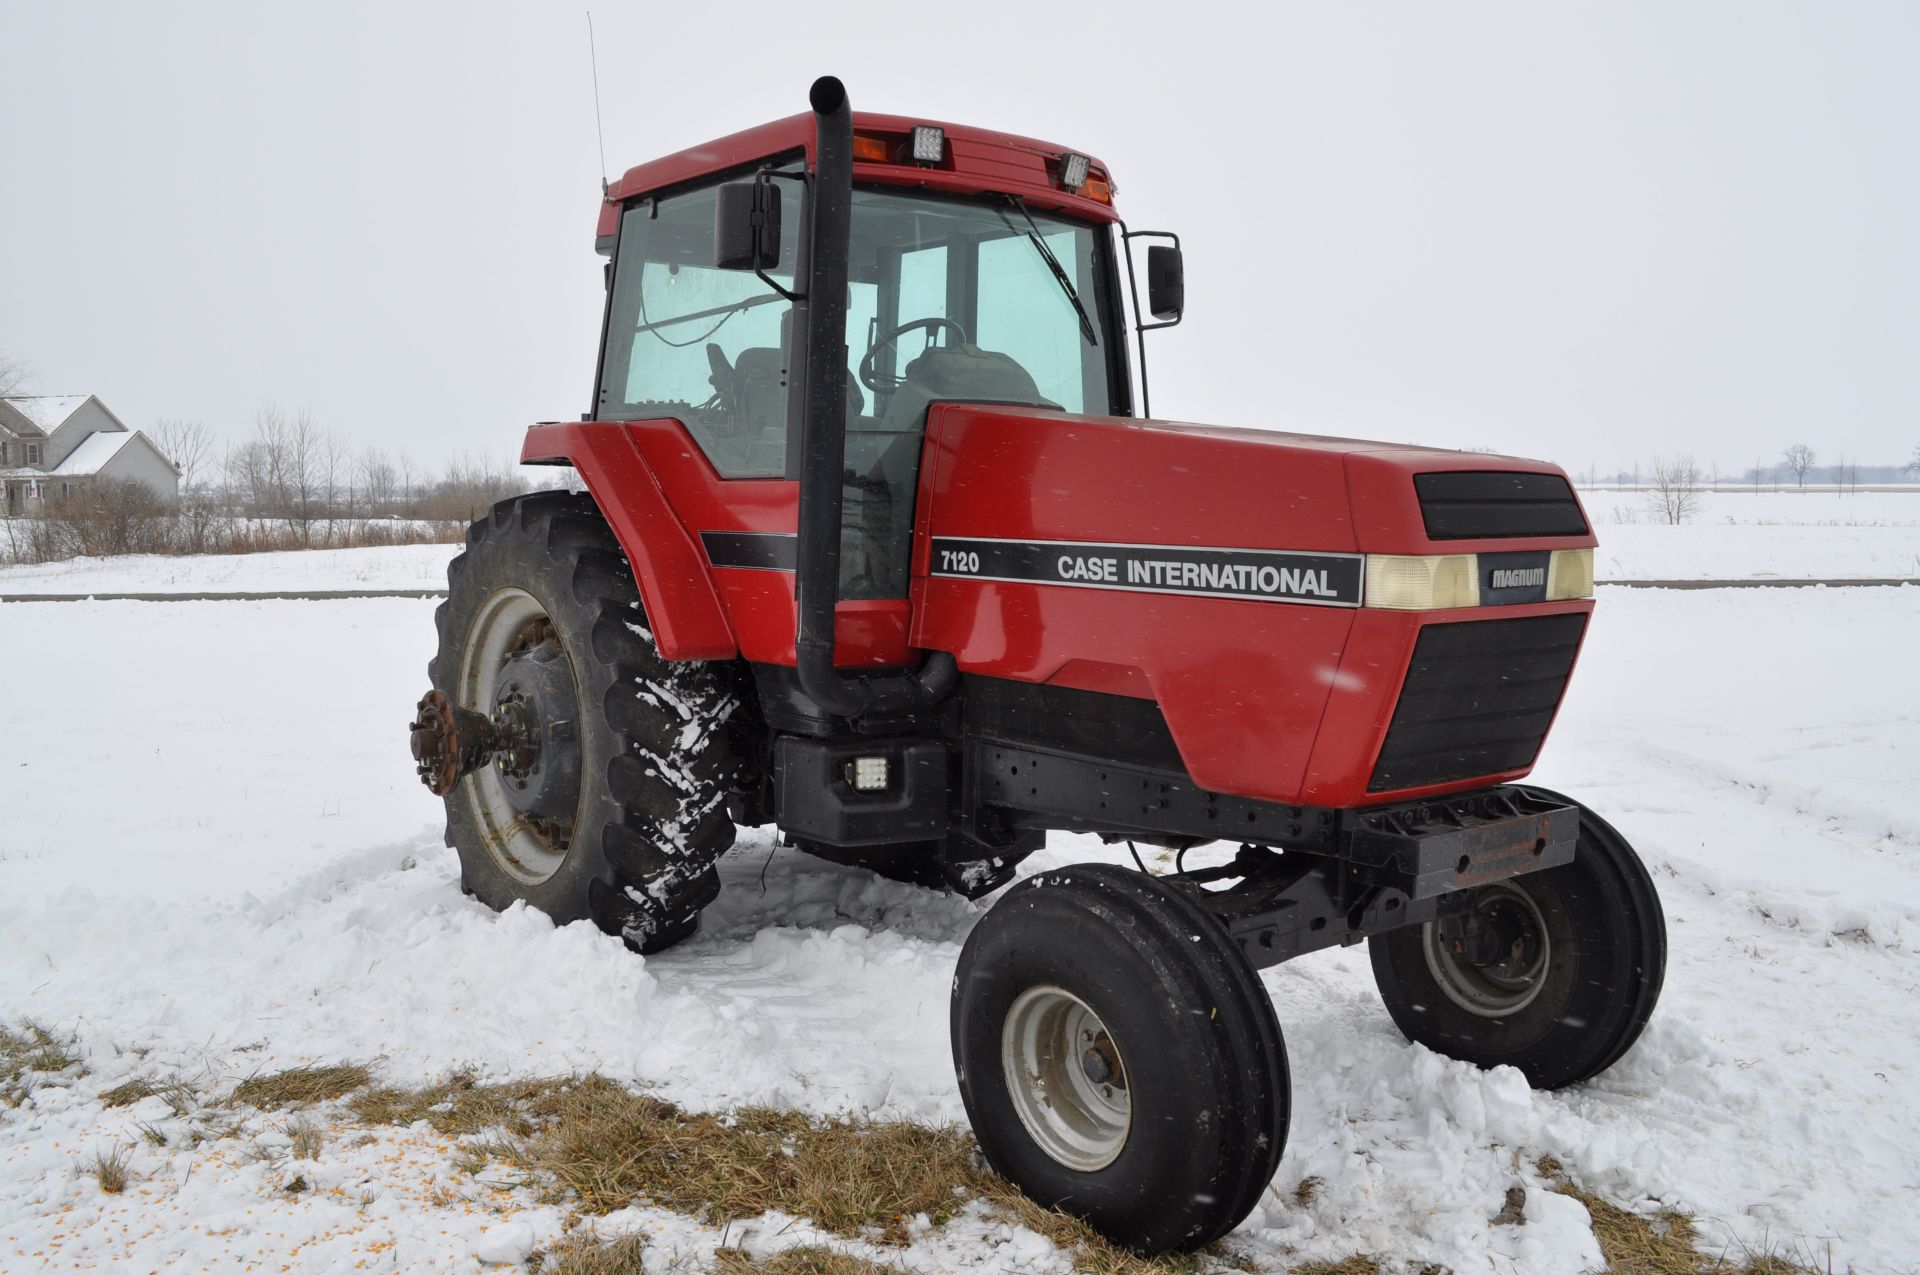 Case IH 7120 tractor, 2WD, power shift, 18.4 R 42 tires, 540/1000 PTO, 3 hyd remotes, 3 pt, shows - Image 2 of 37